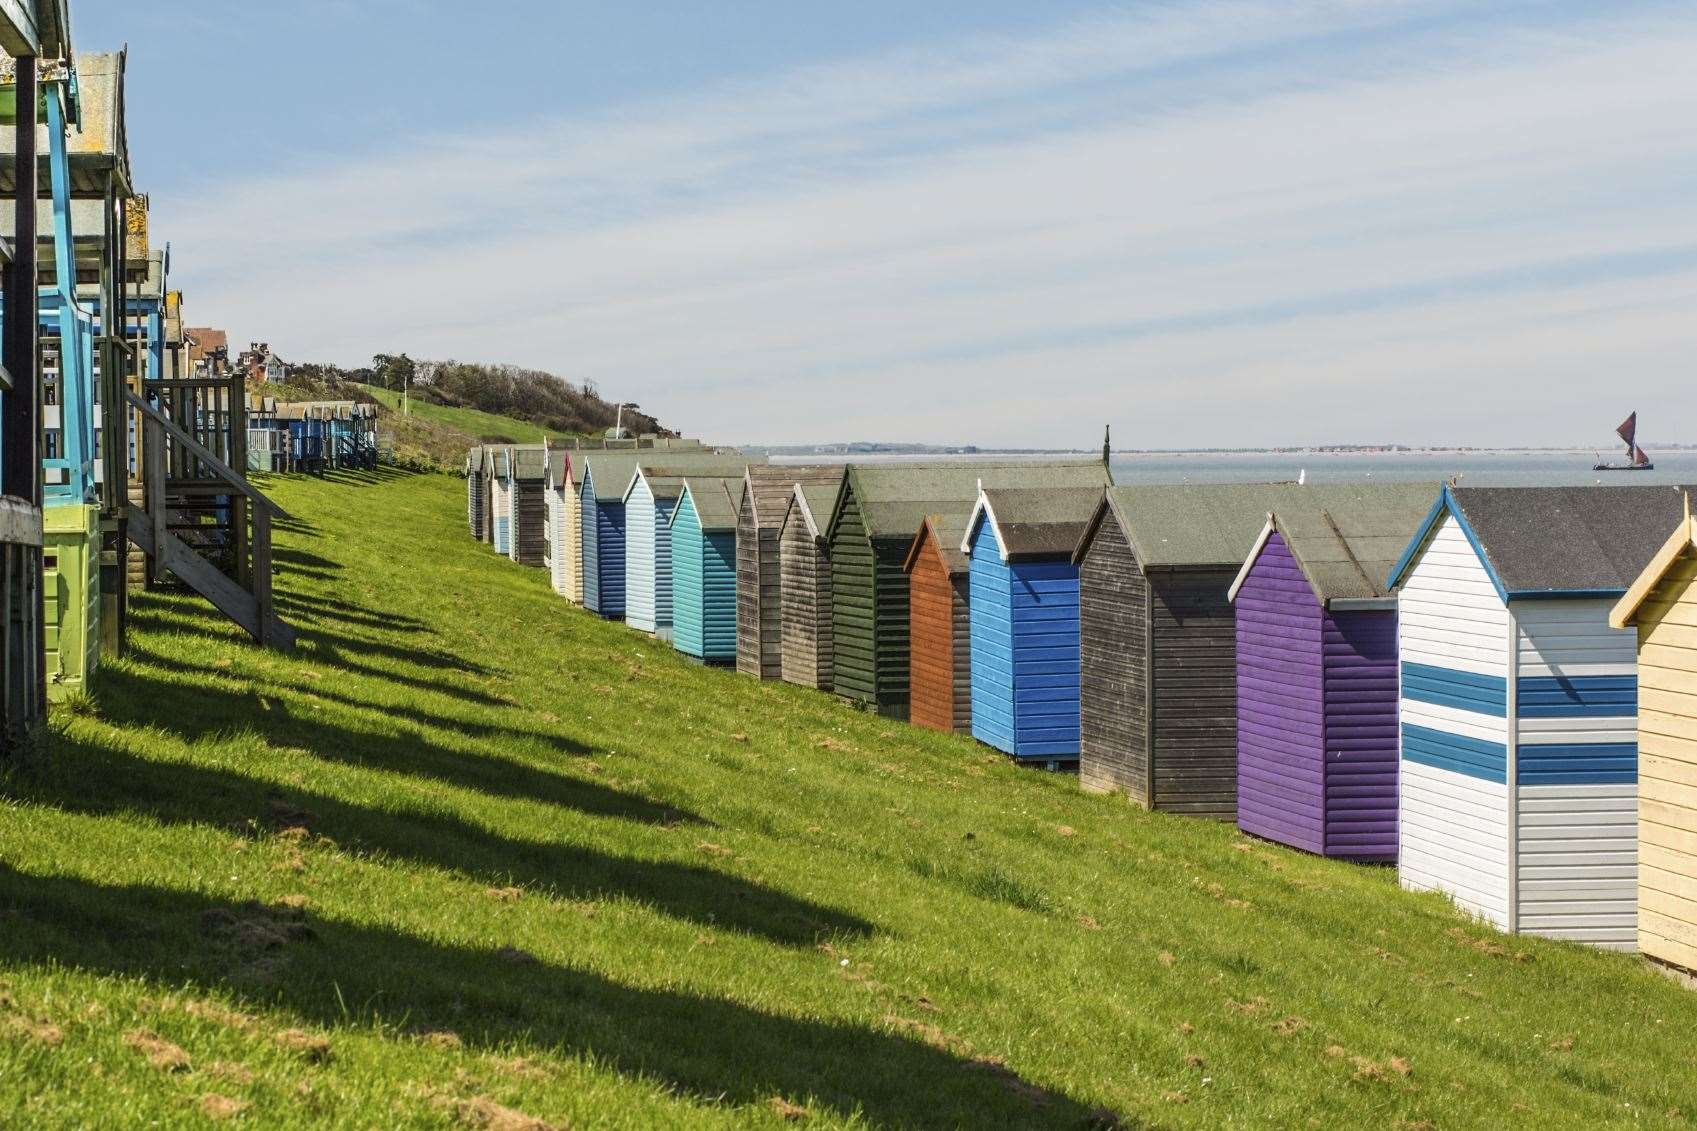 There are currently three rows of huts at Tankerton